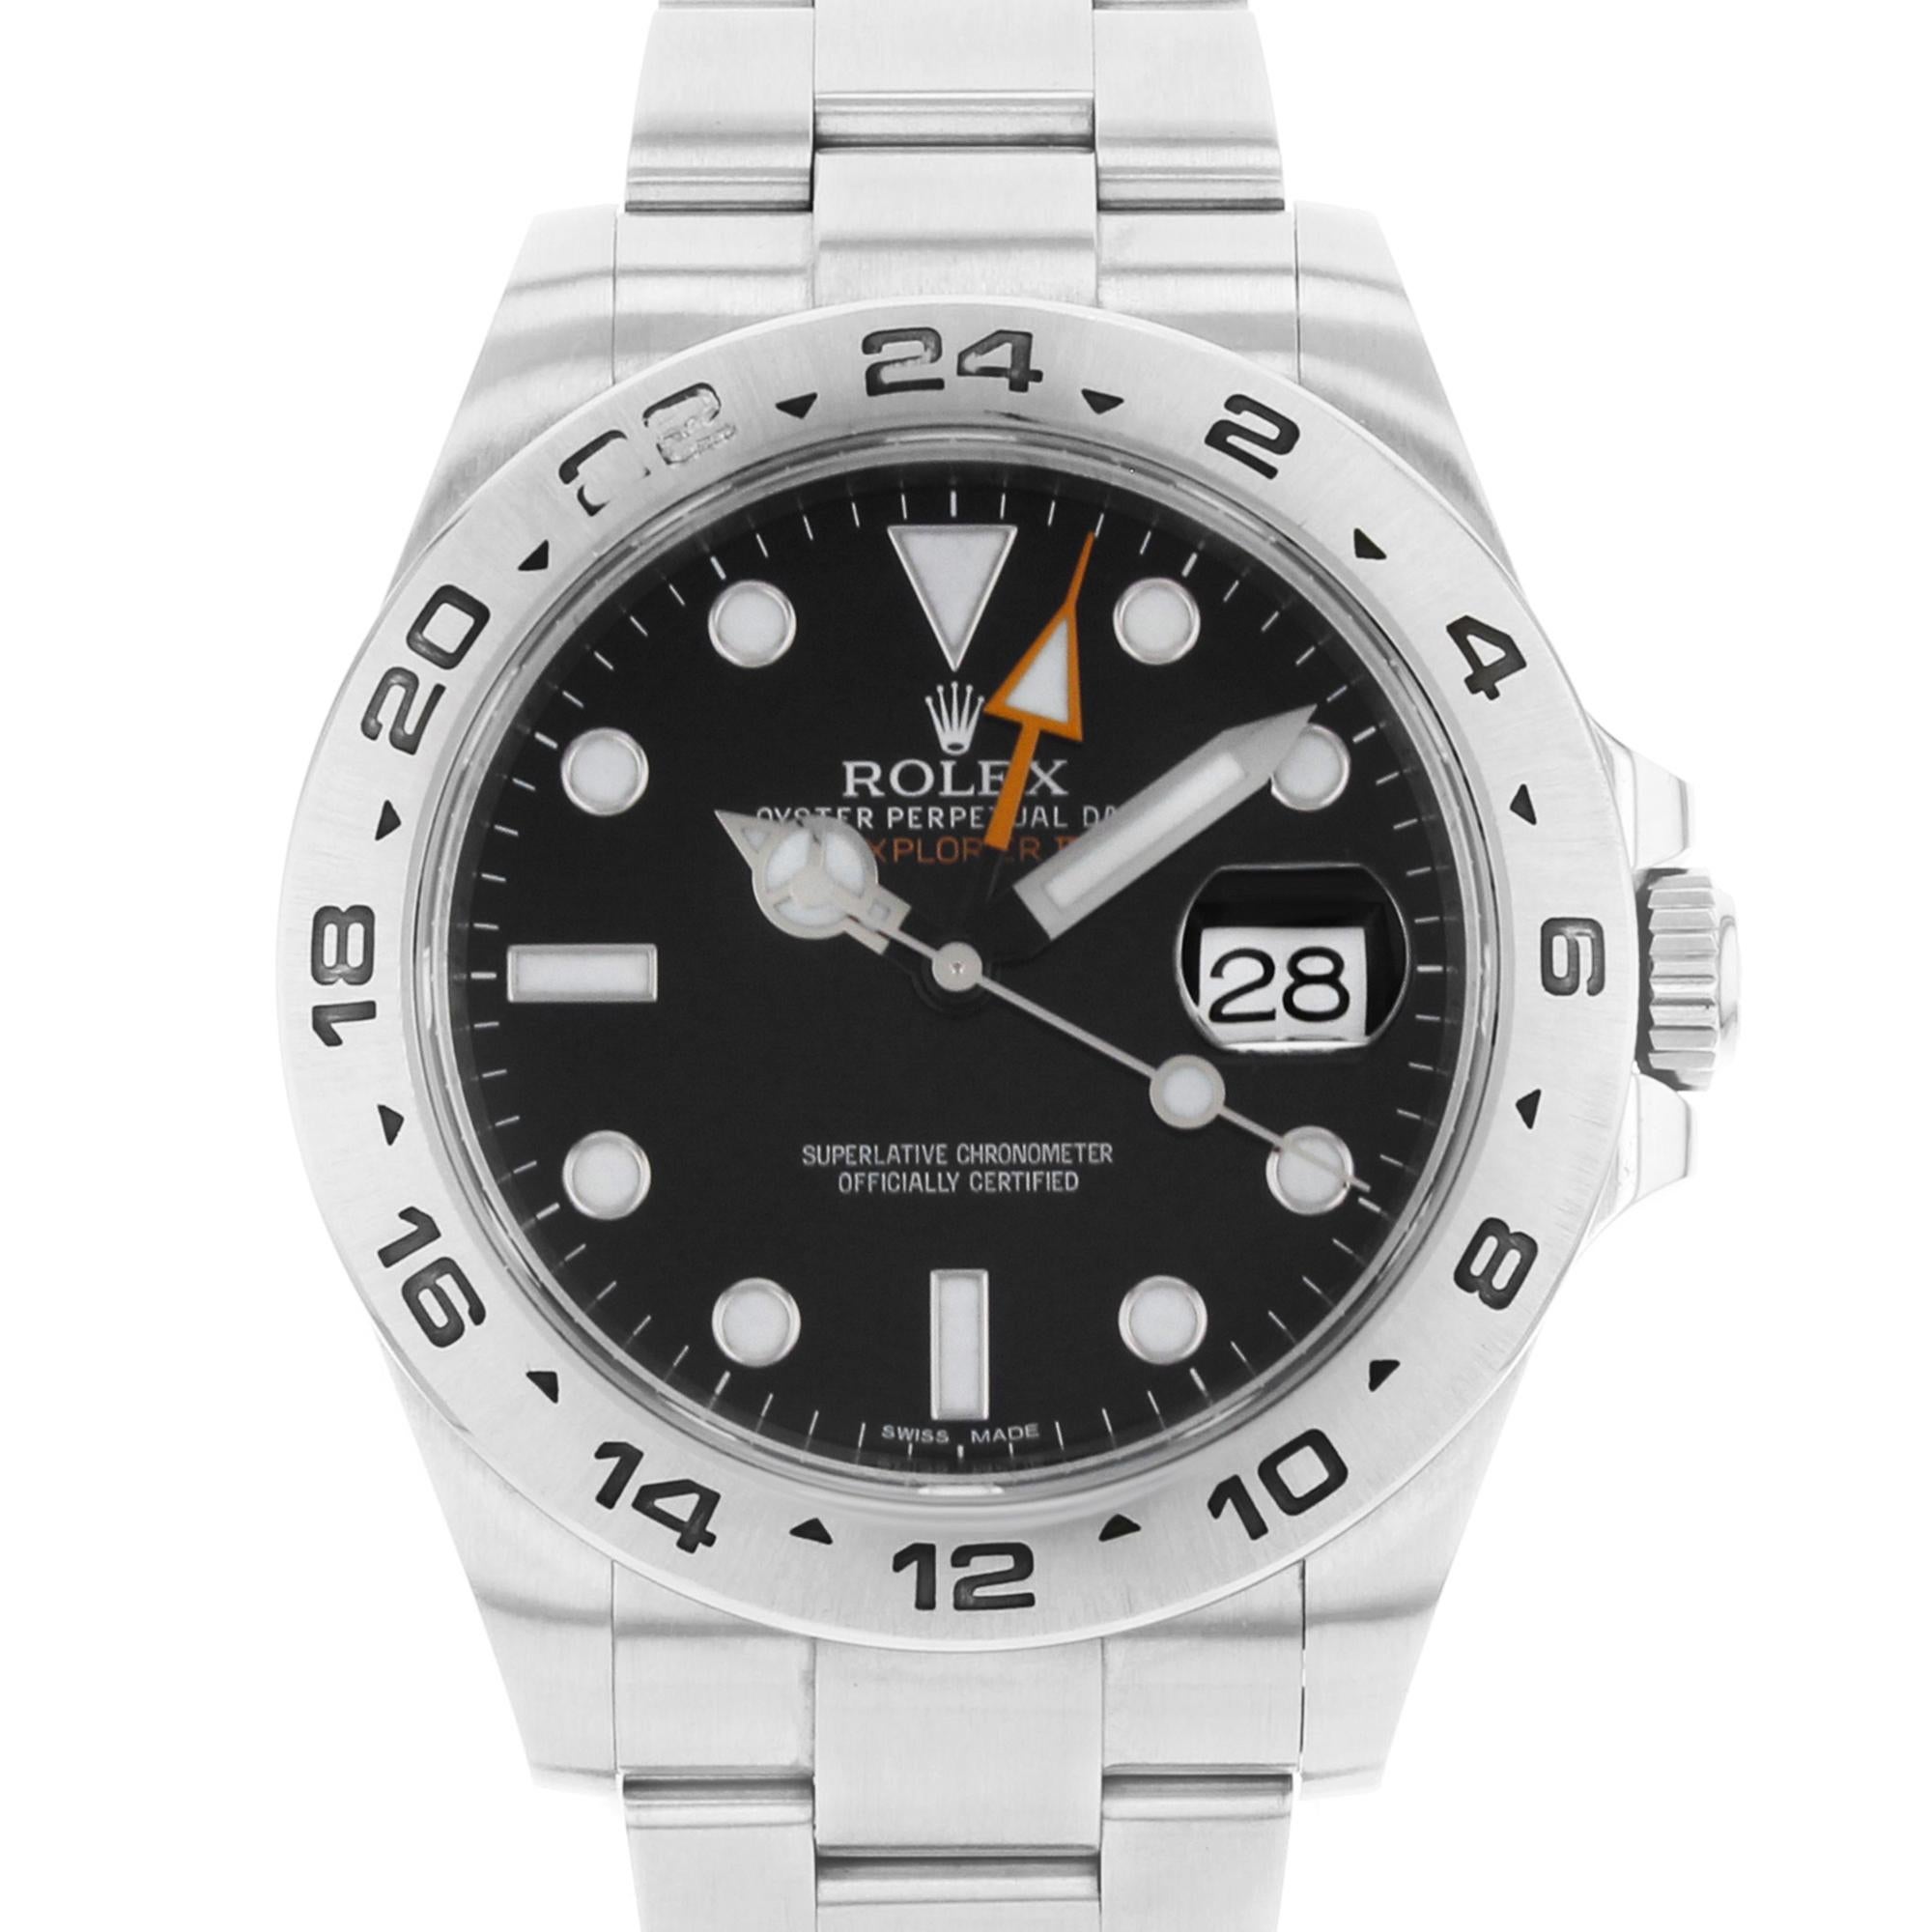 Rolex Explorer II 216570 Black Dial GMT 2010 Stainless Steel Automatic Men Watch